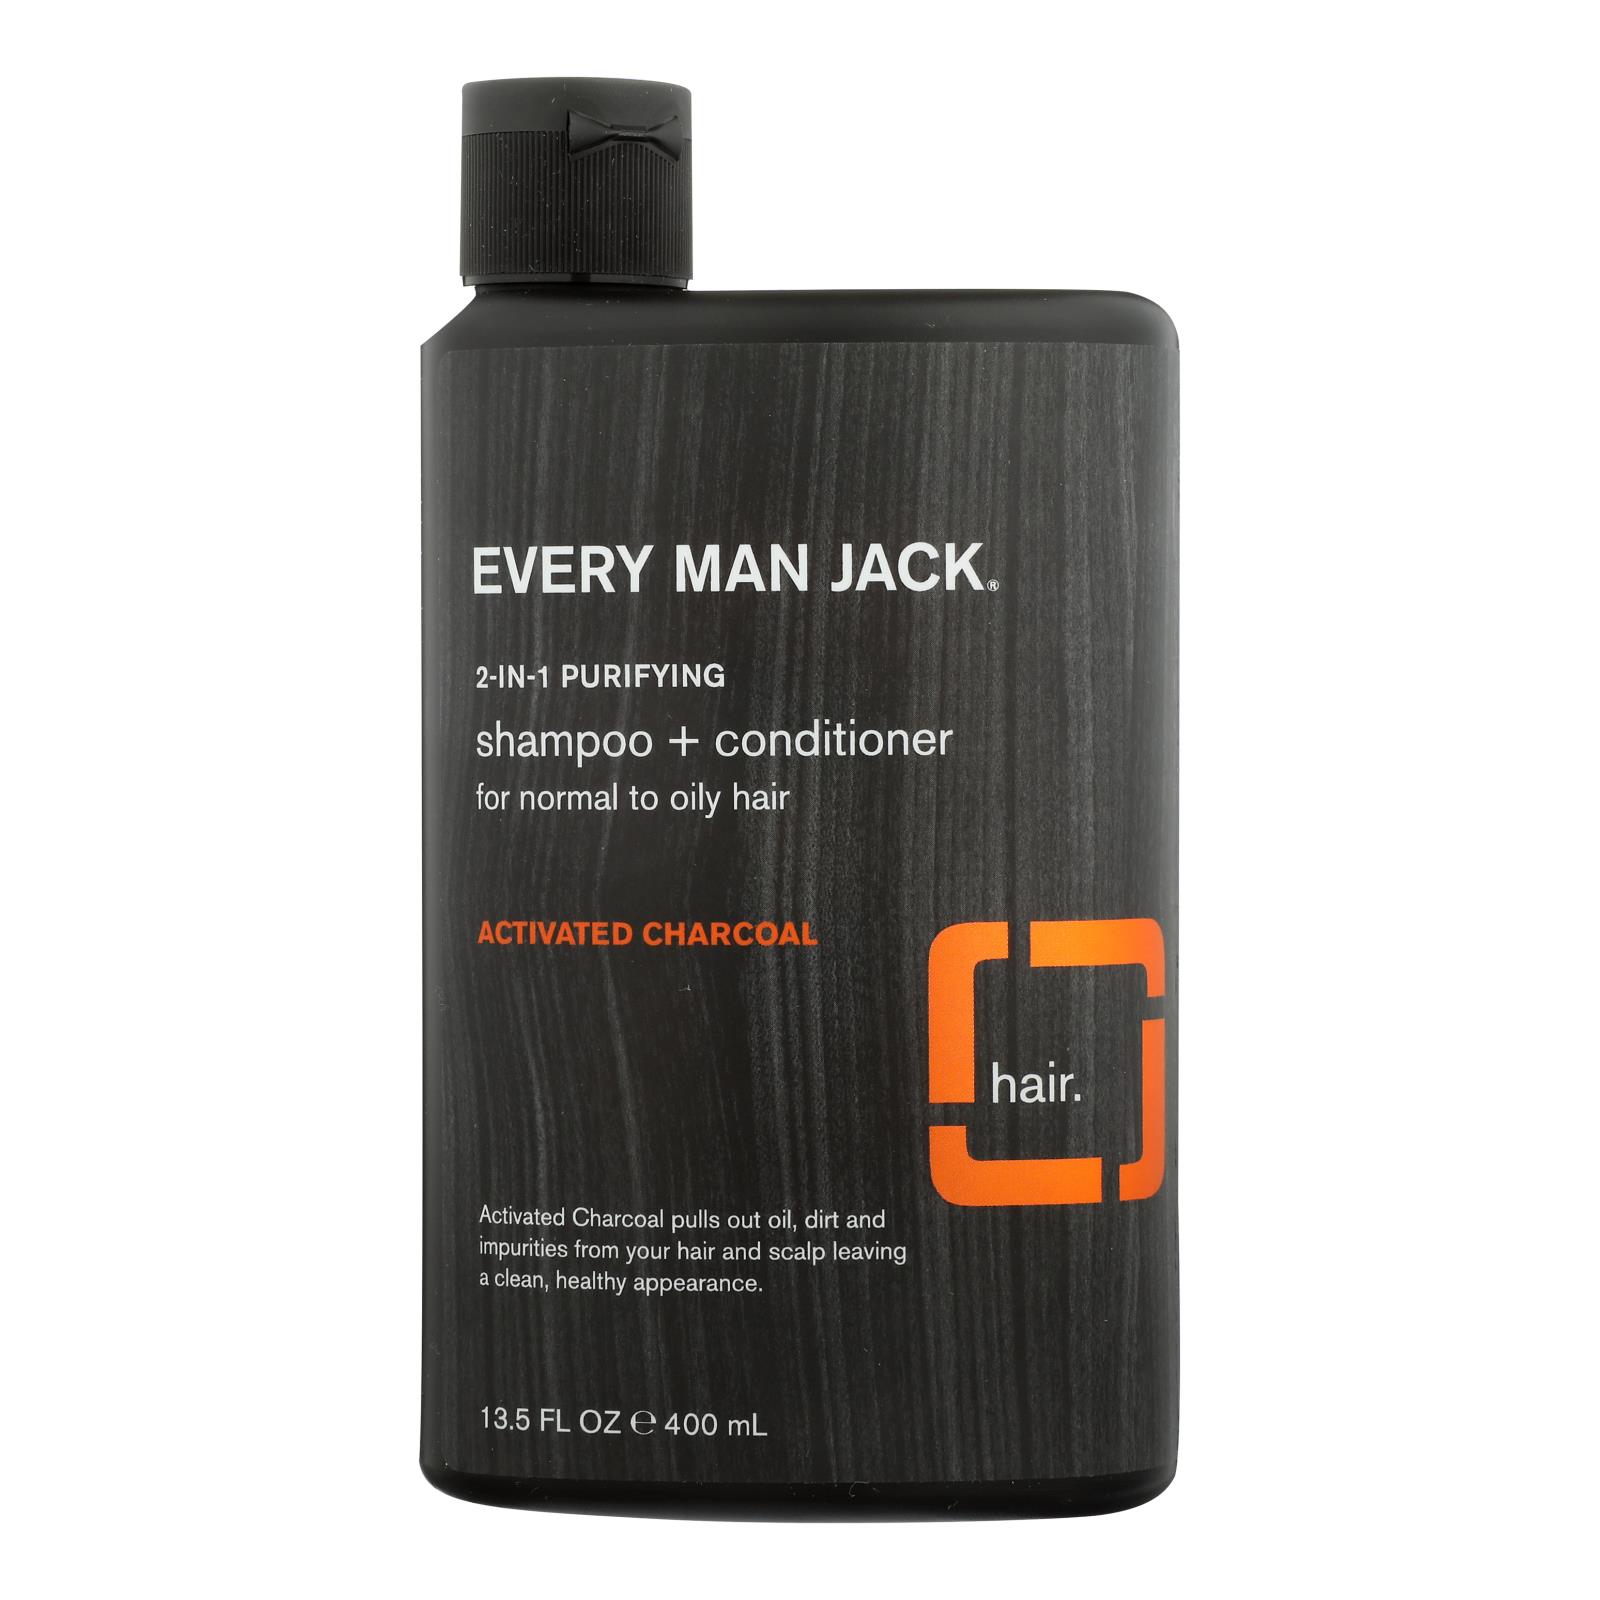 Every Man Jack - 2in1 Purfing Activ/charcl - 1 Each - 13.5 OZ